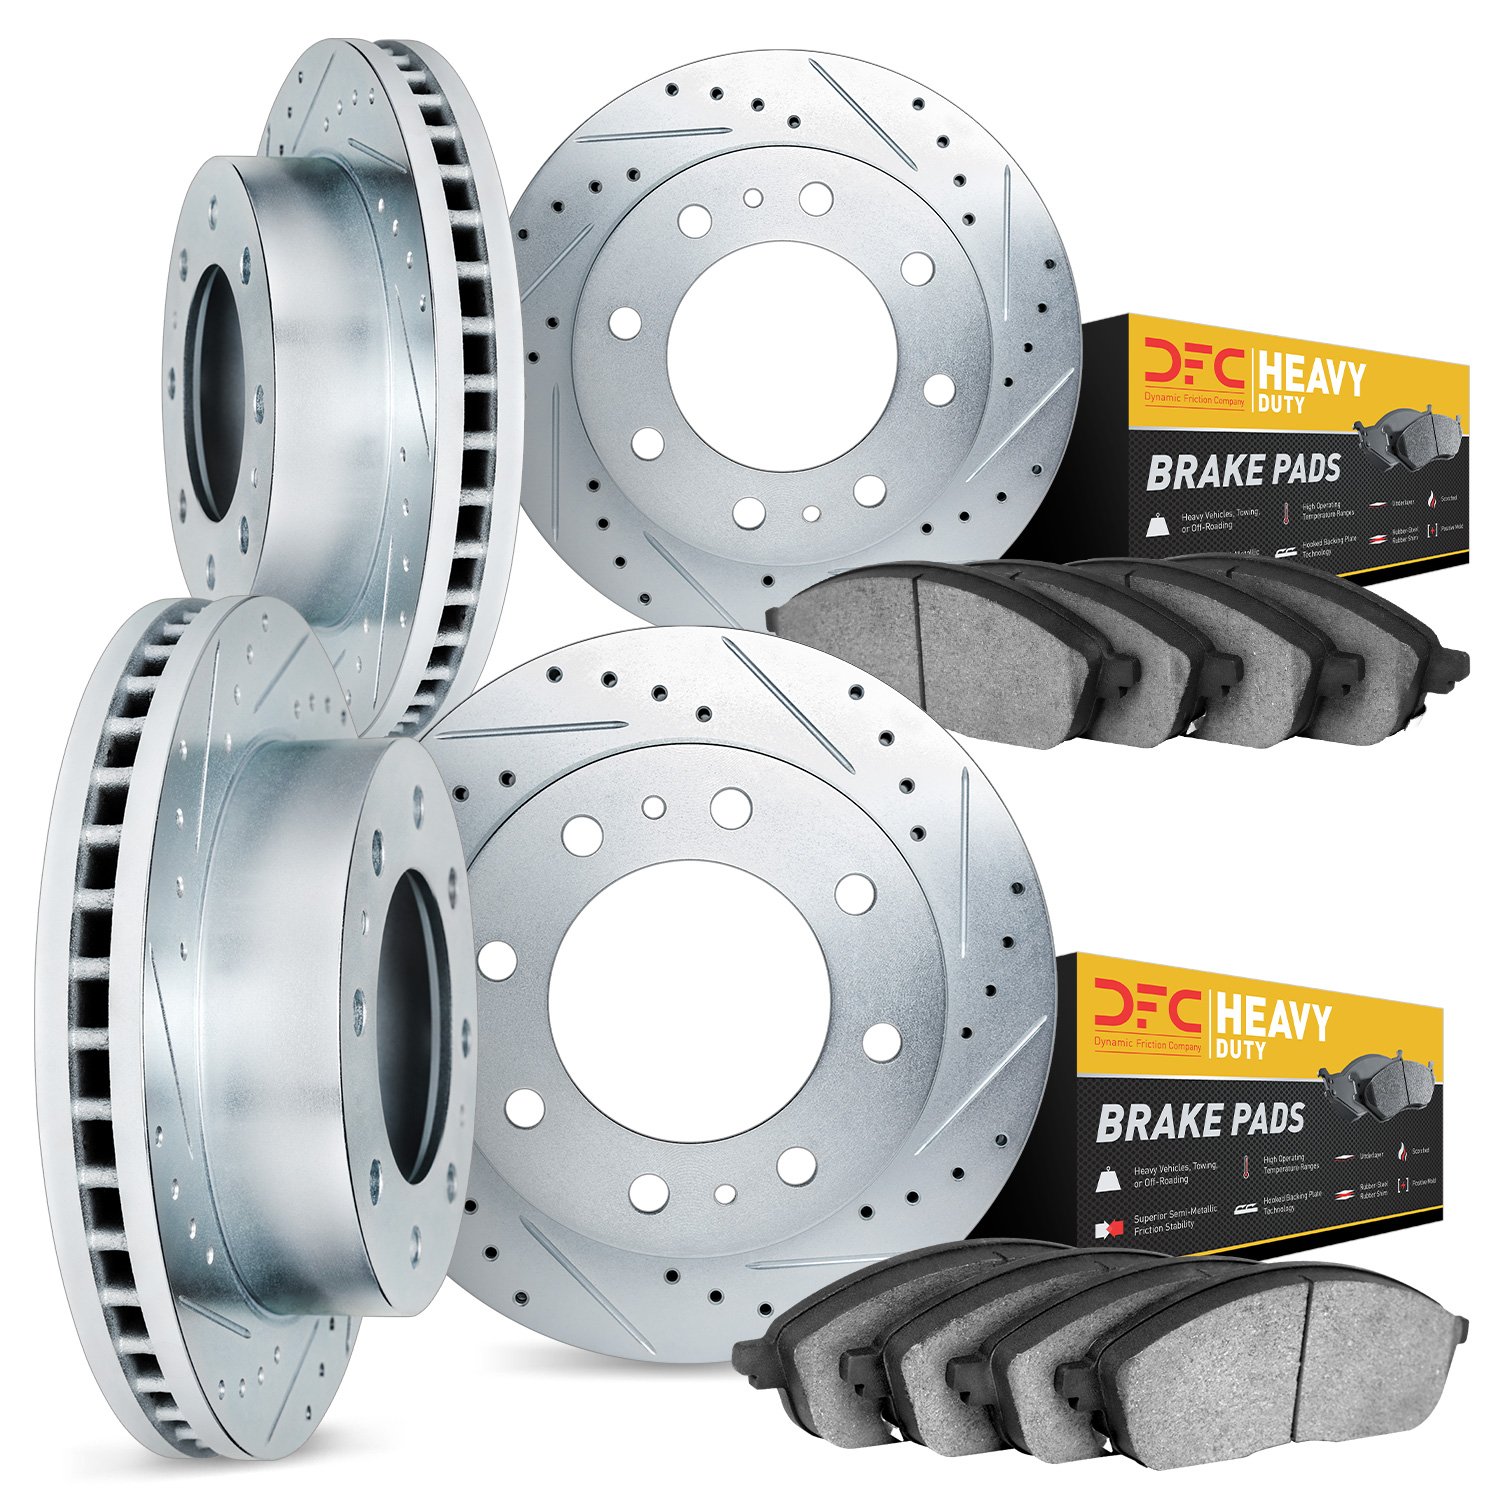 Drilled/Slotted Rotors w/Heavy-Duty Brake Pads Kit [Silver], Fits